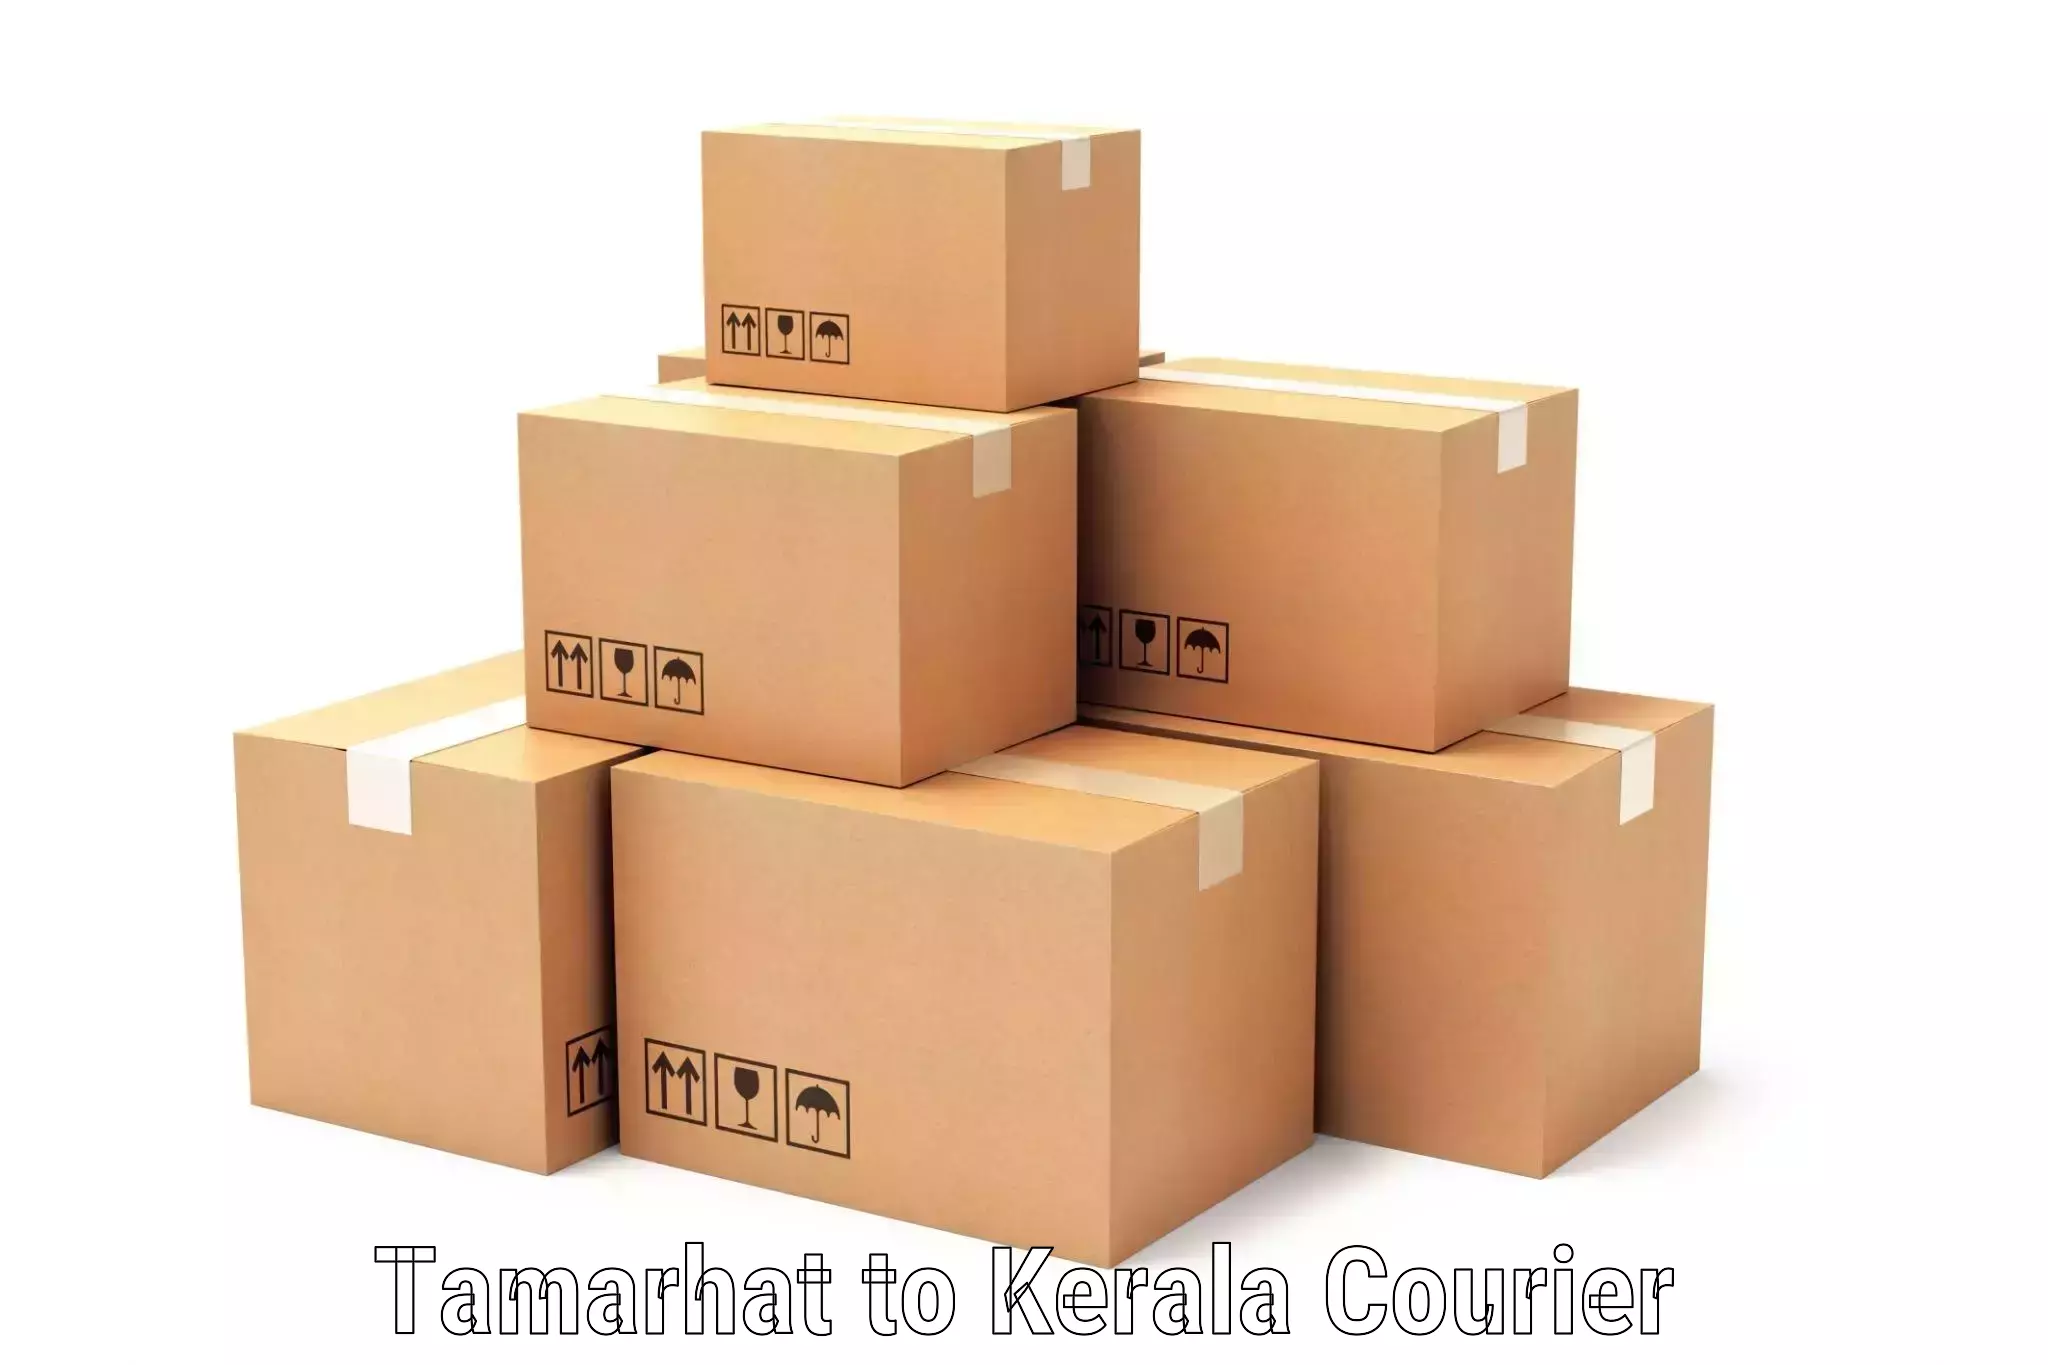 Parcel service for businesses Tamarhat to Karimba